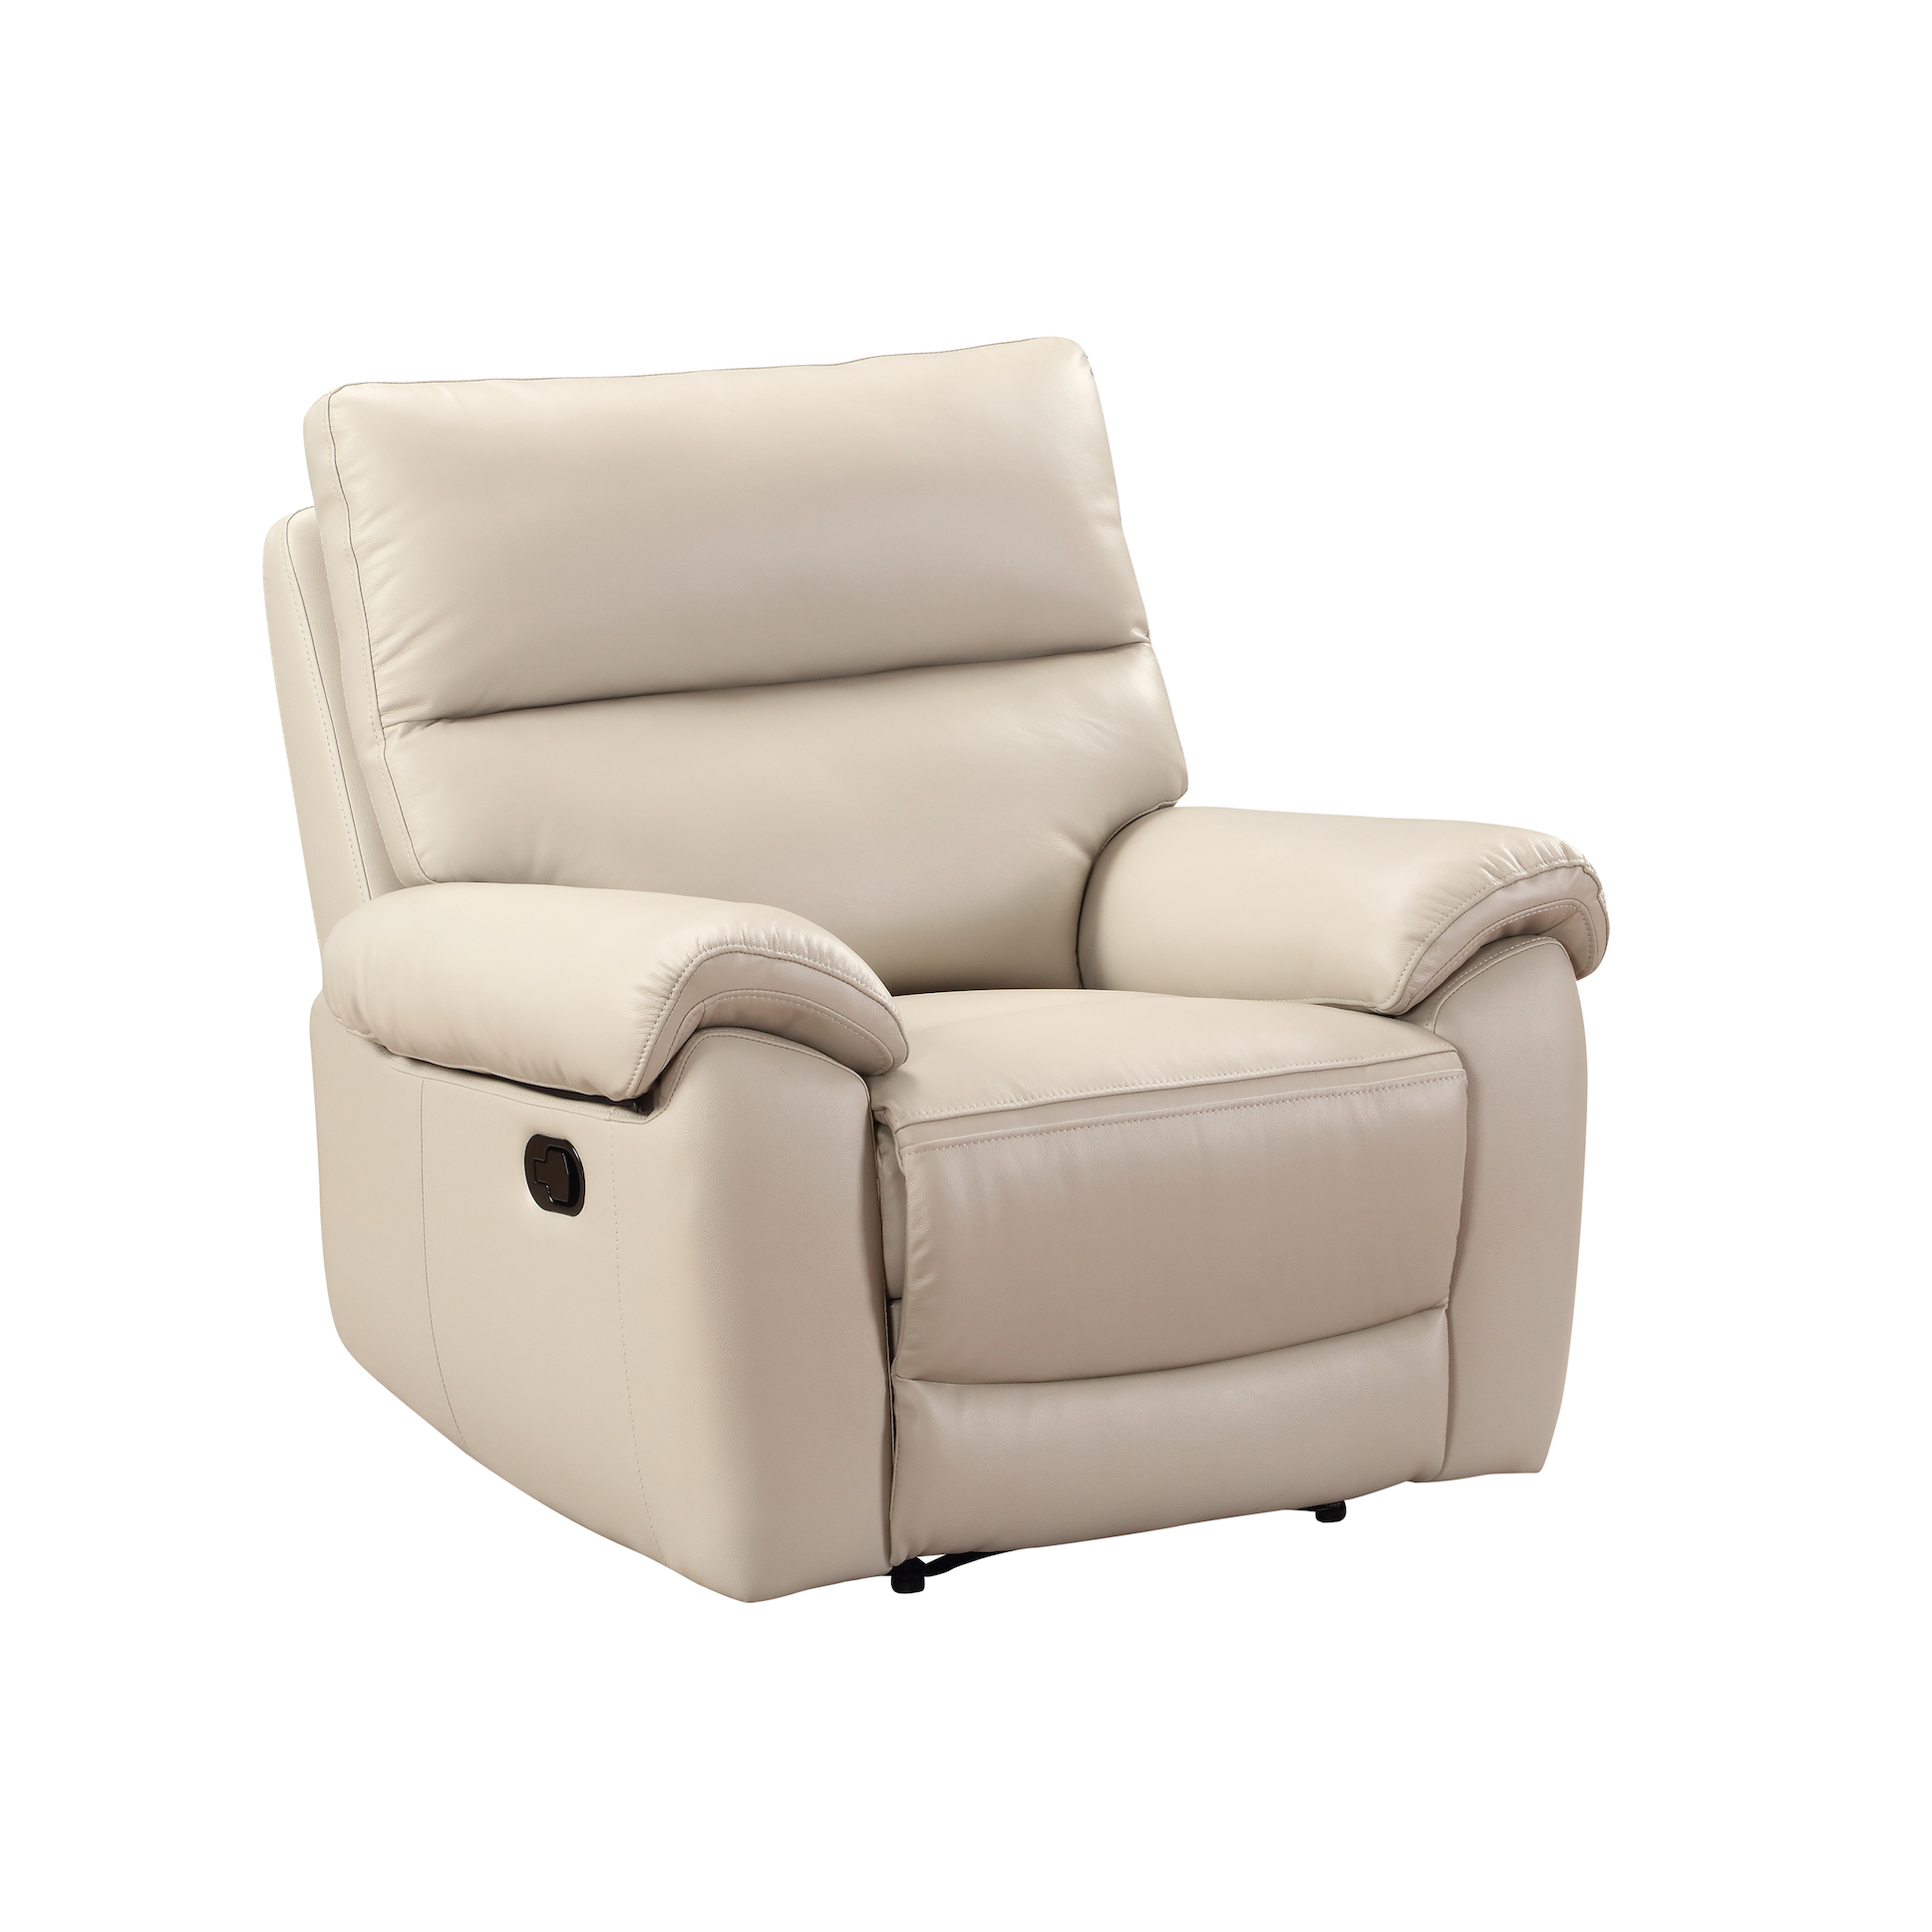 Rocco Manual Recliner Chair Chalk Leather